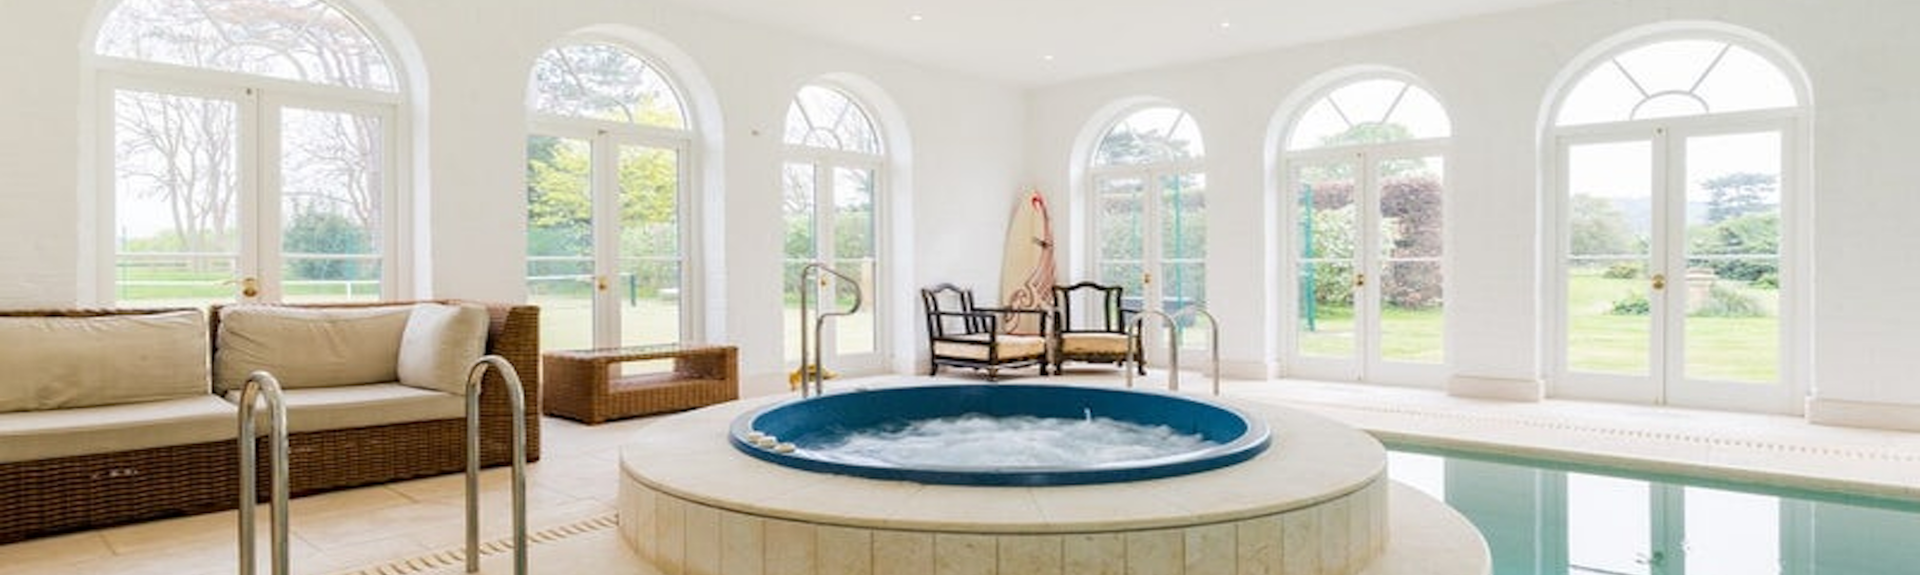 The indoor pool and hot tub in an Agency-managed luxury holiday cottage in Worcestershire